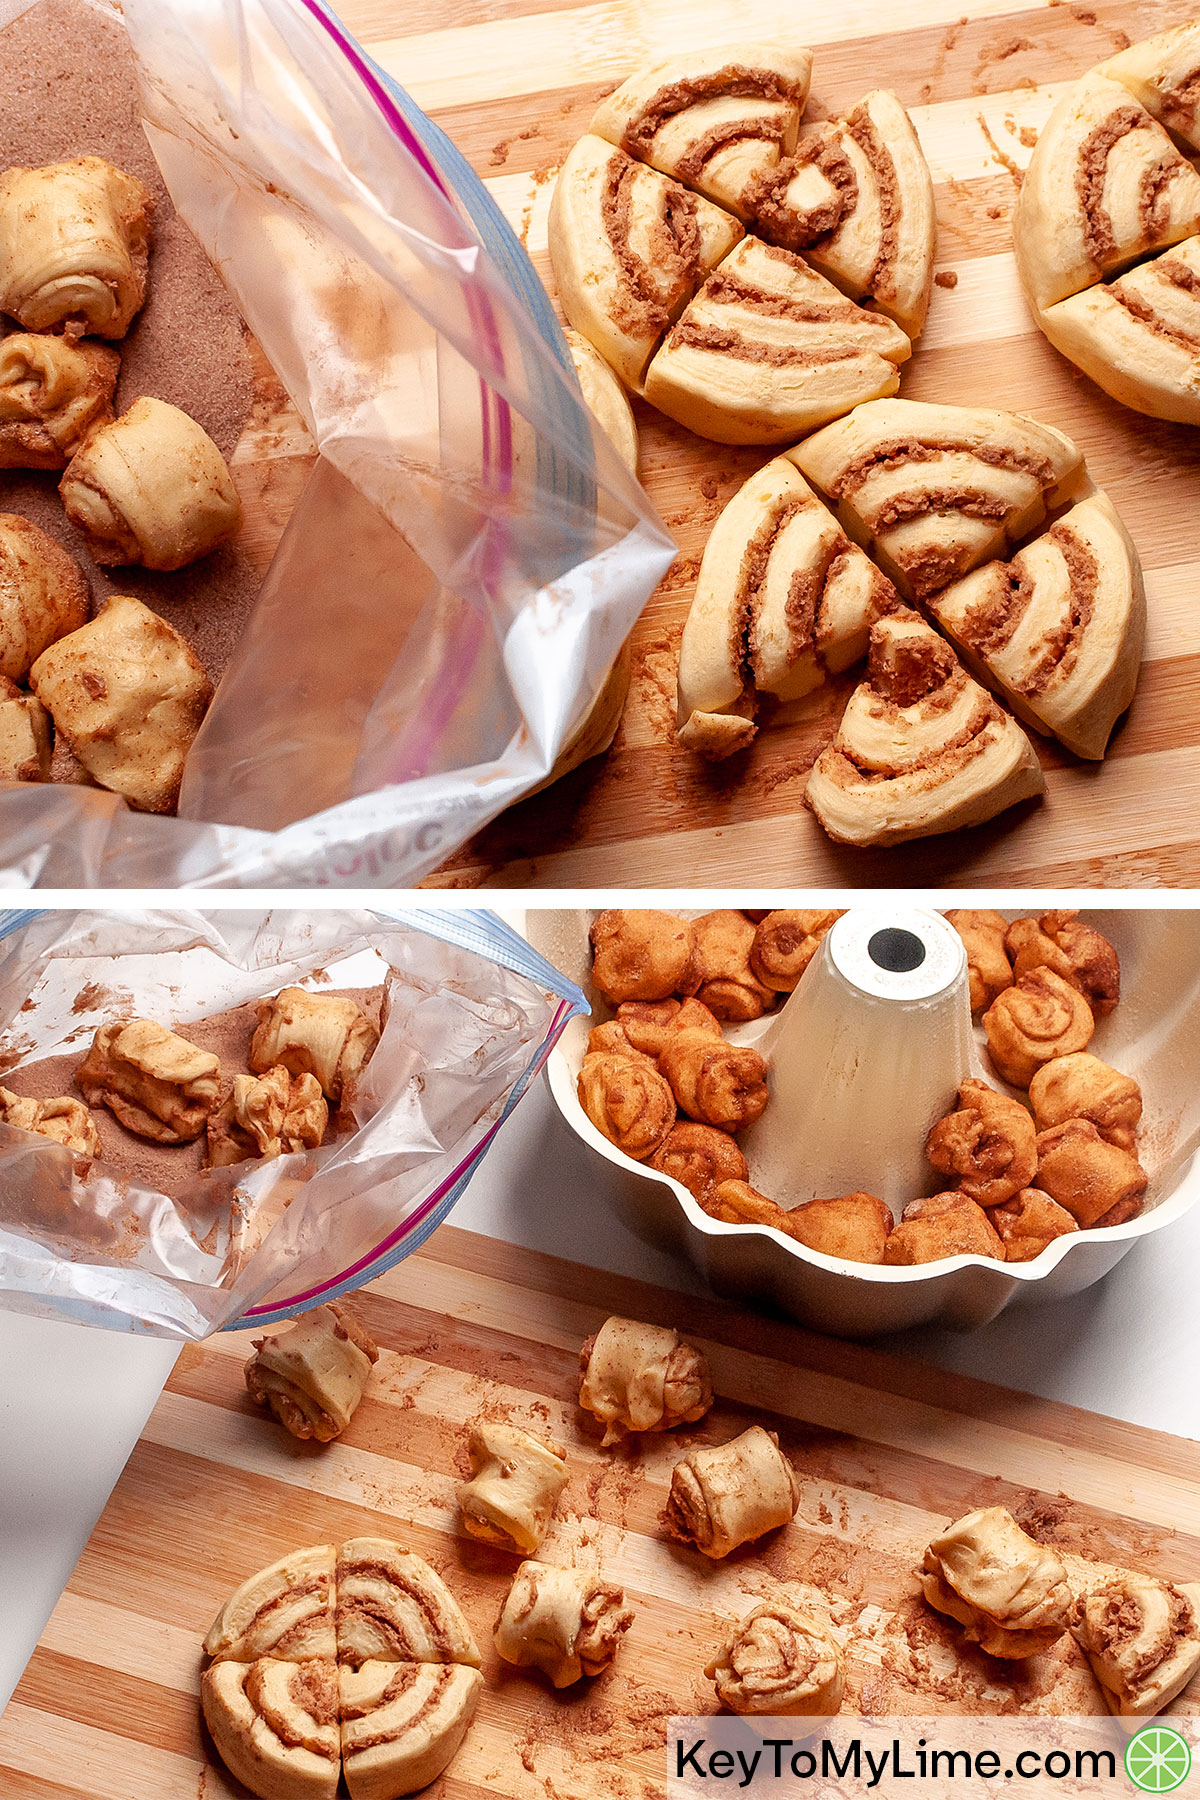 Coating cinnamon roll dough in cinnamon sugar, then filling the Bundt pan with it.